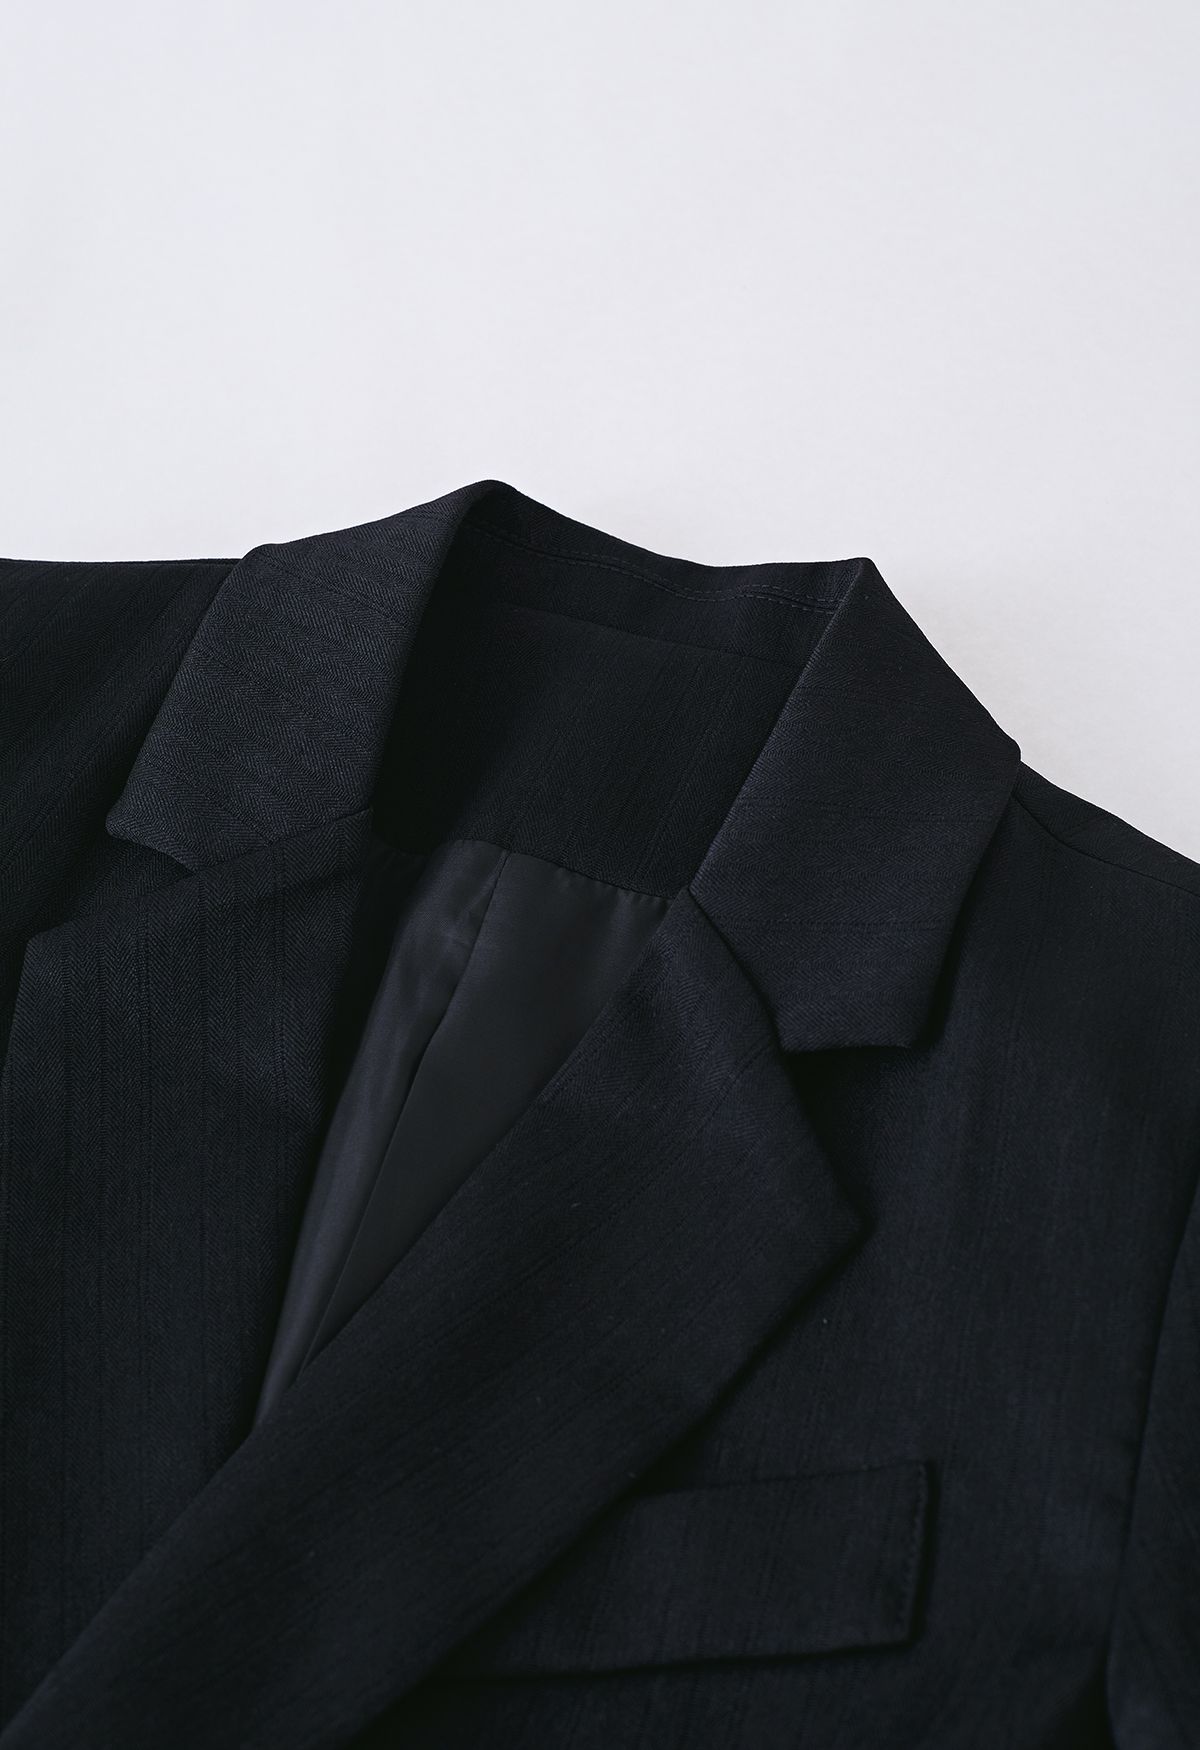 Solid Color Textured Double-Breasted Blazer in Black